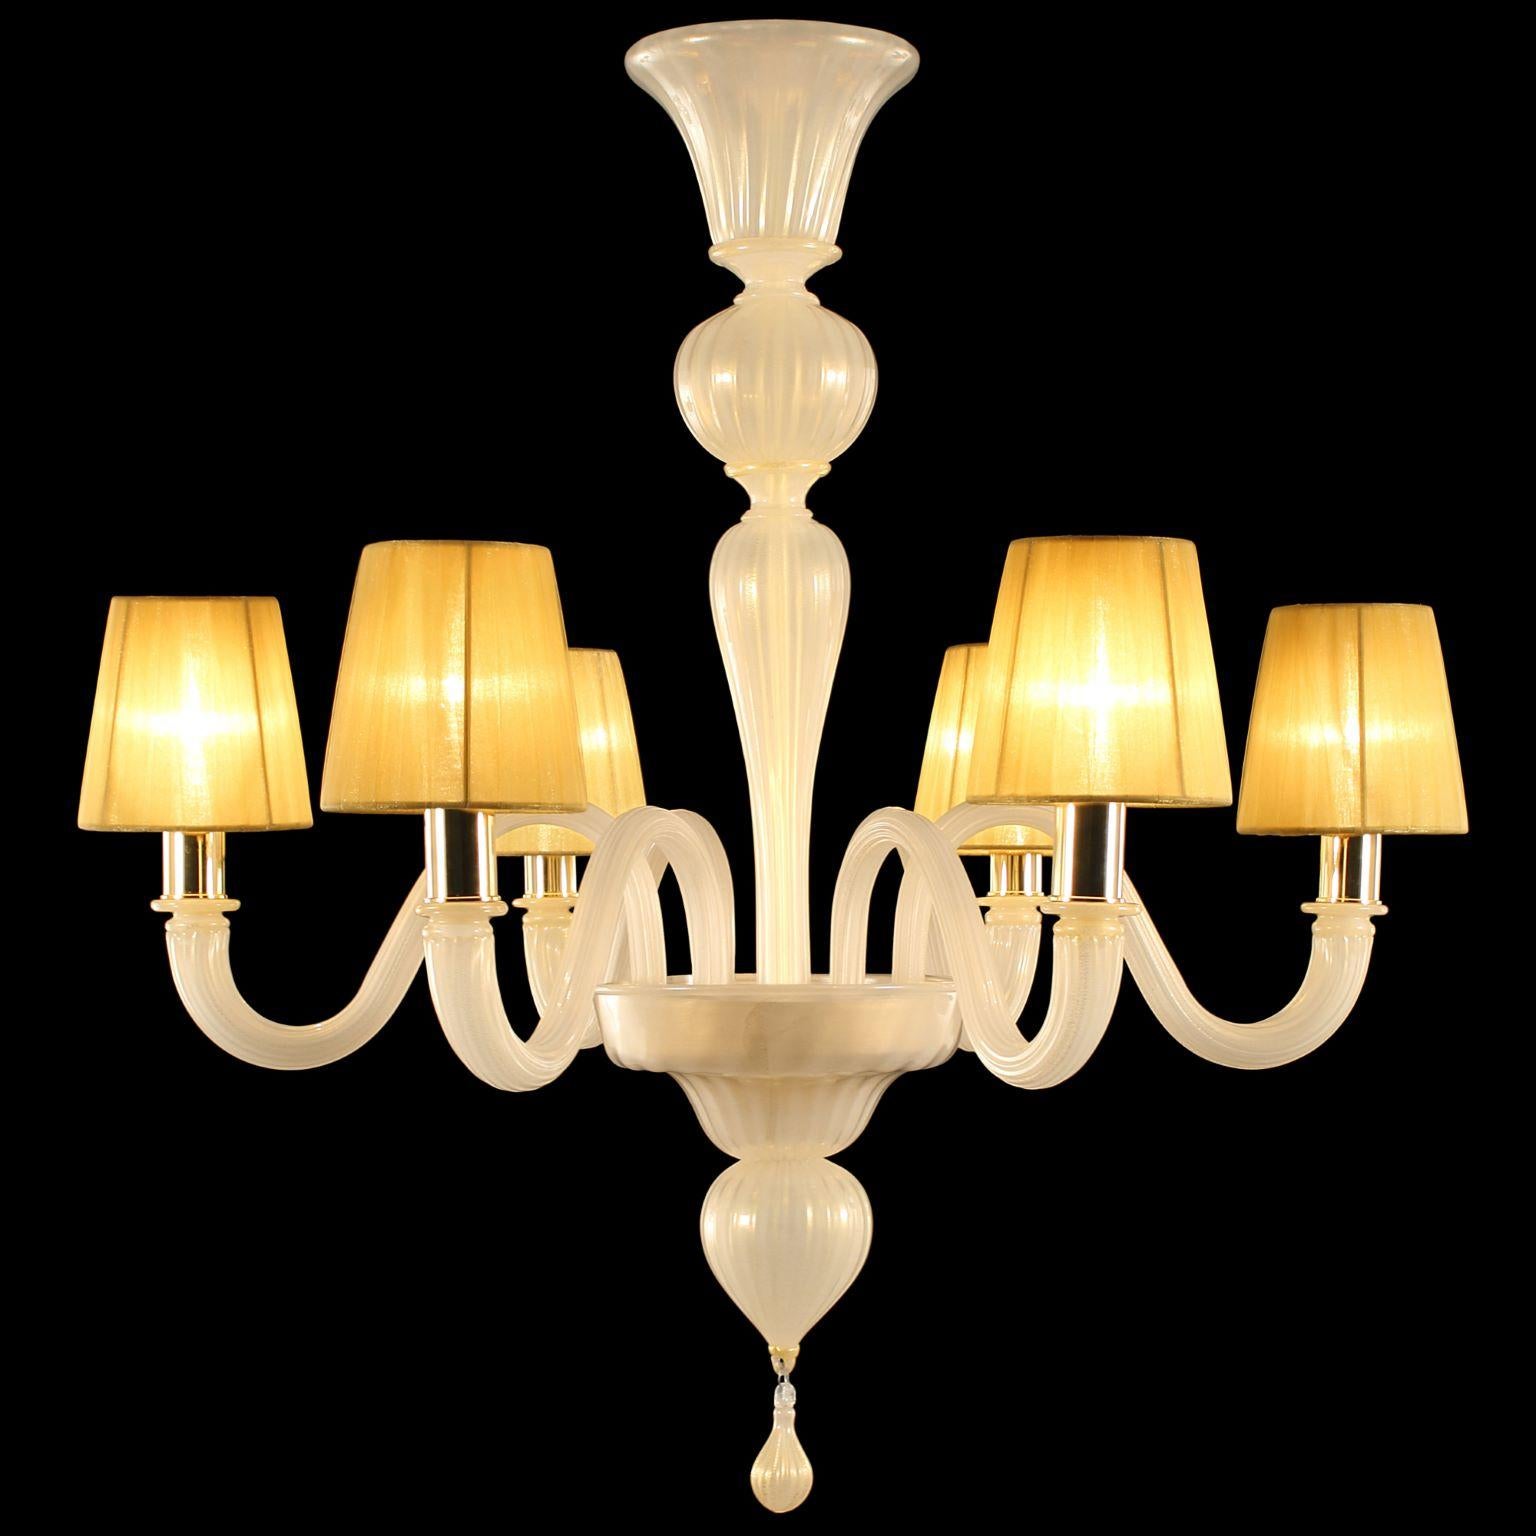 Chapeau chandelier 6-light artistic white silk and gold Murano glass, amber organza handmade in Florence lampshades by Multiforme.
 
Chapeau is a Classic and essential chandelier, it is handcrafted using high quality materials in murano glass and